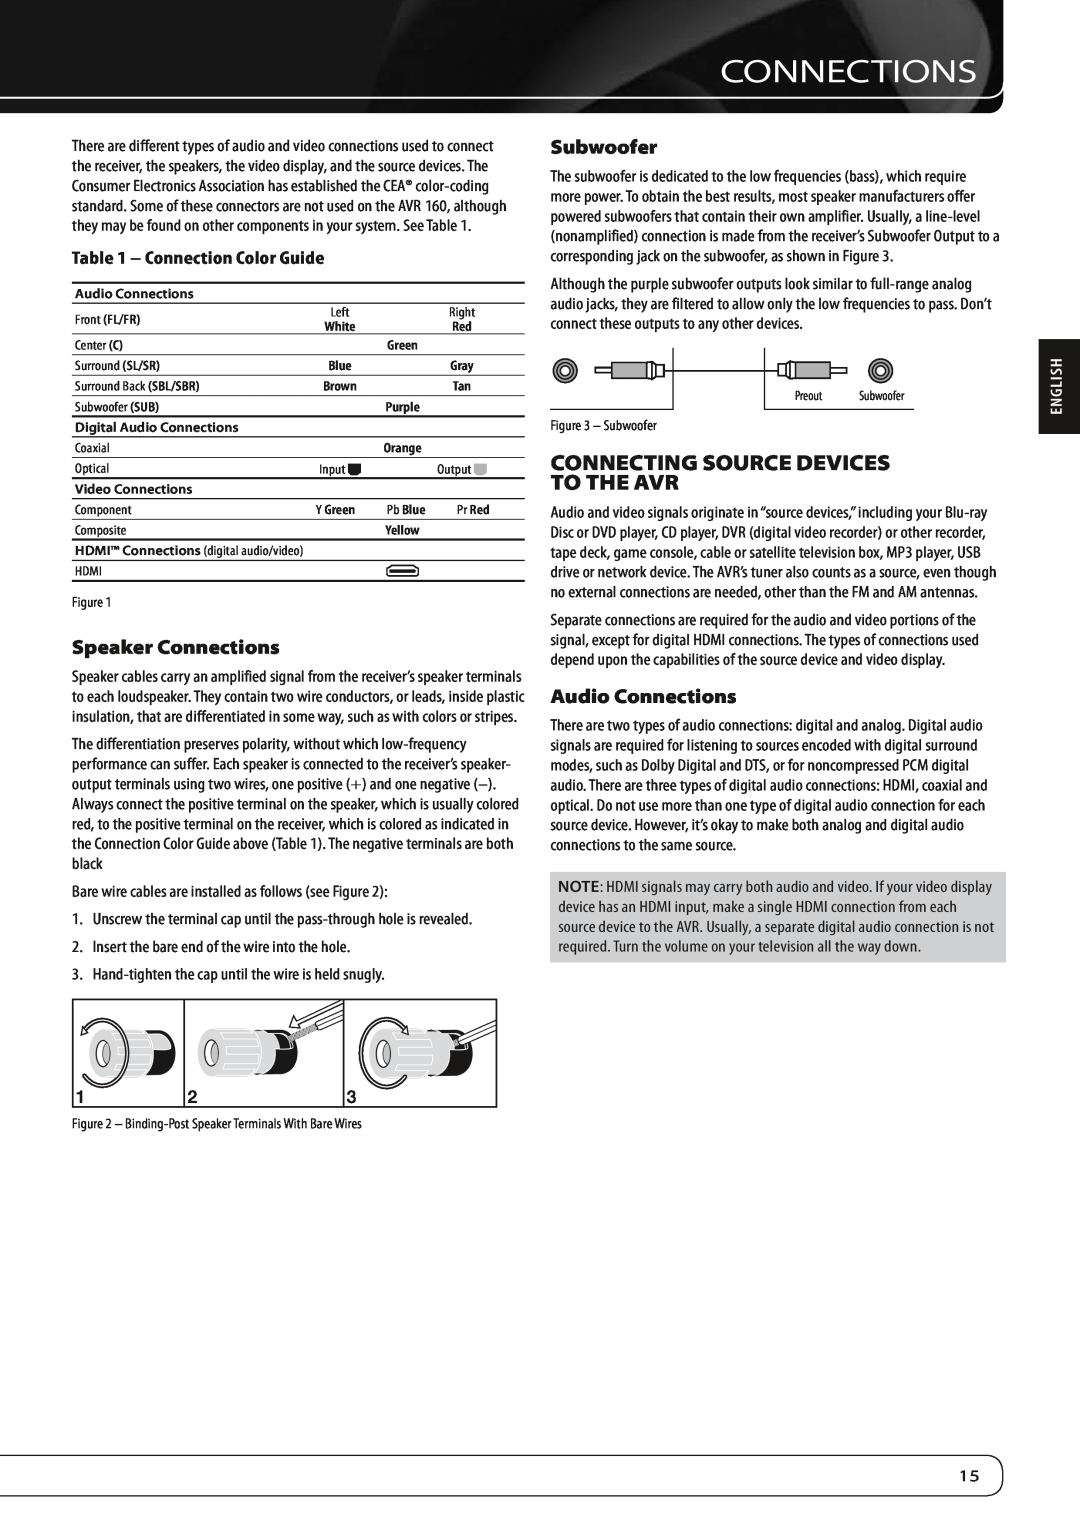 Harman-Kardon AVR 160 owner manual Speaker Connections, Subwoofer, Audio Connections, English, Connection Color Guide 